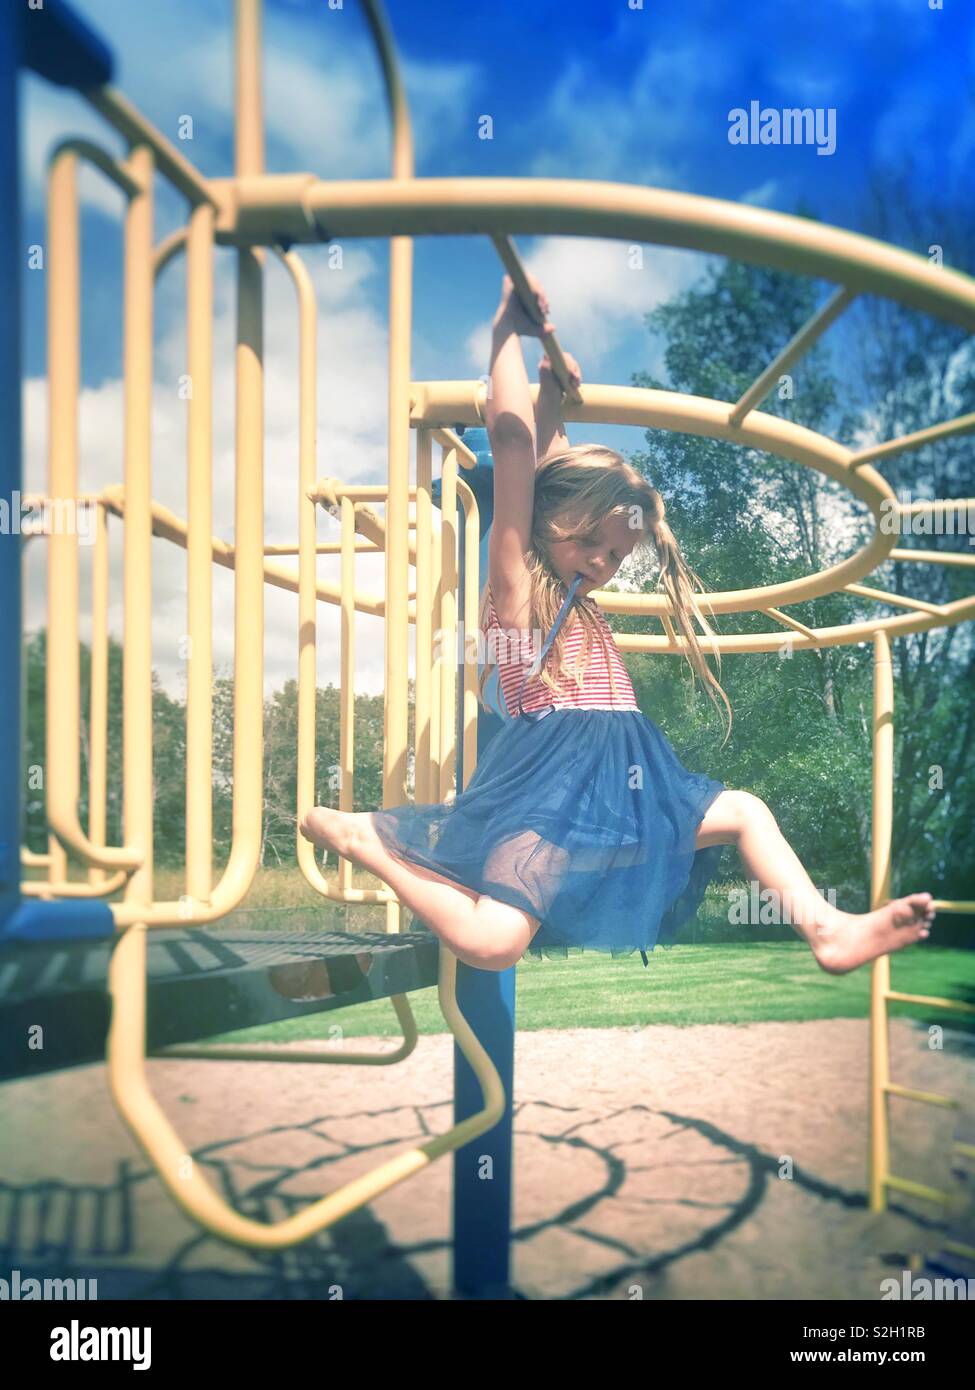 Image Of Young Girl Playing On Monkey Bars At The Park